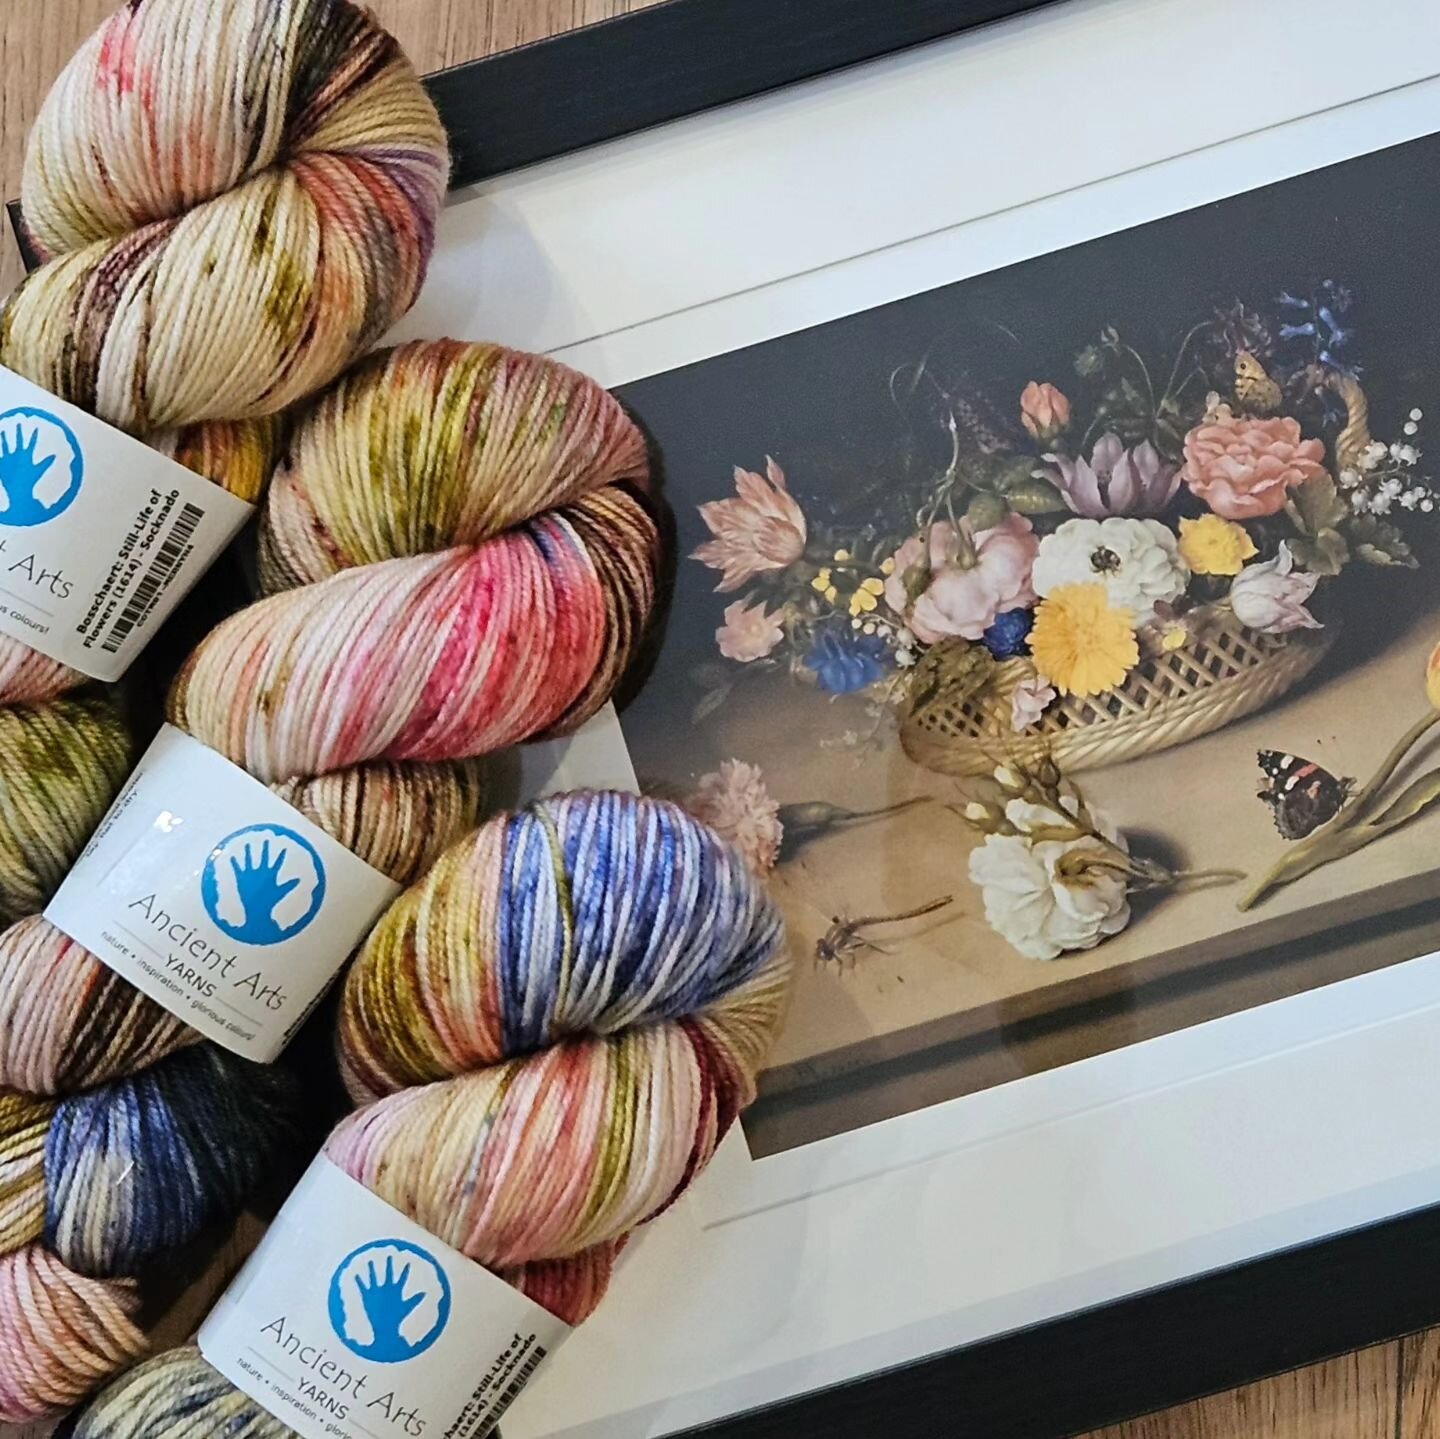 It 100% looks and feels like a beautiful winter day outside, but these stunning skeins of @ancientartsyarn yarn have us thinking spring.

Did you hear? @ancientartsyarn announced Flowers in Famous Artwork as their 2024 Colour of the Month theme. This